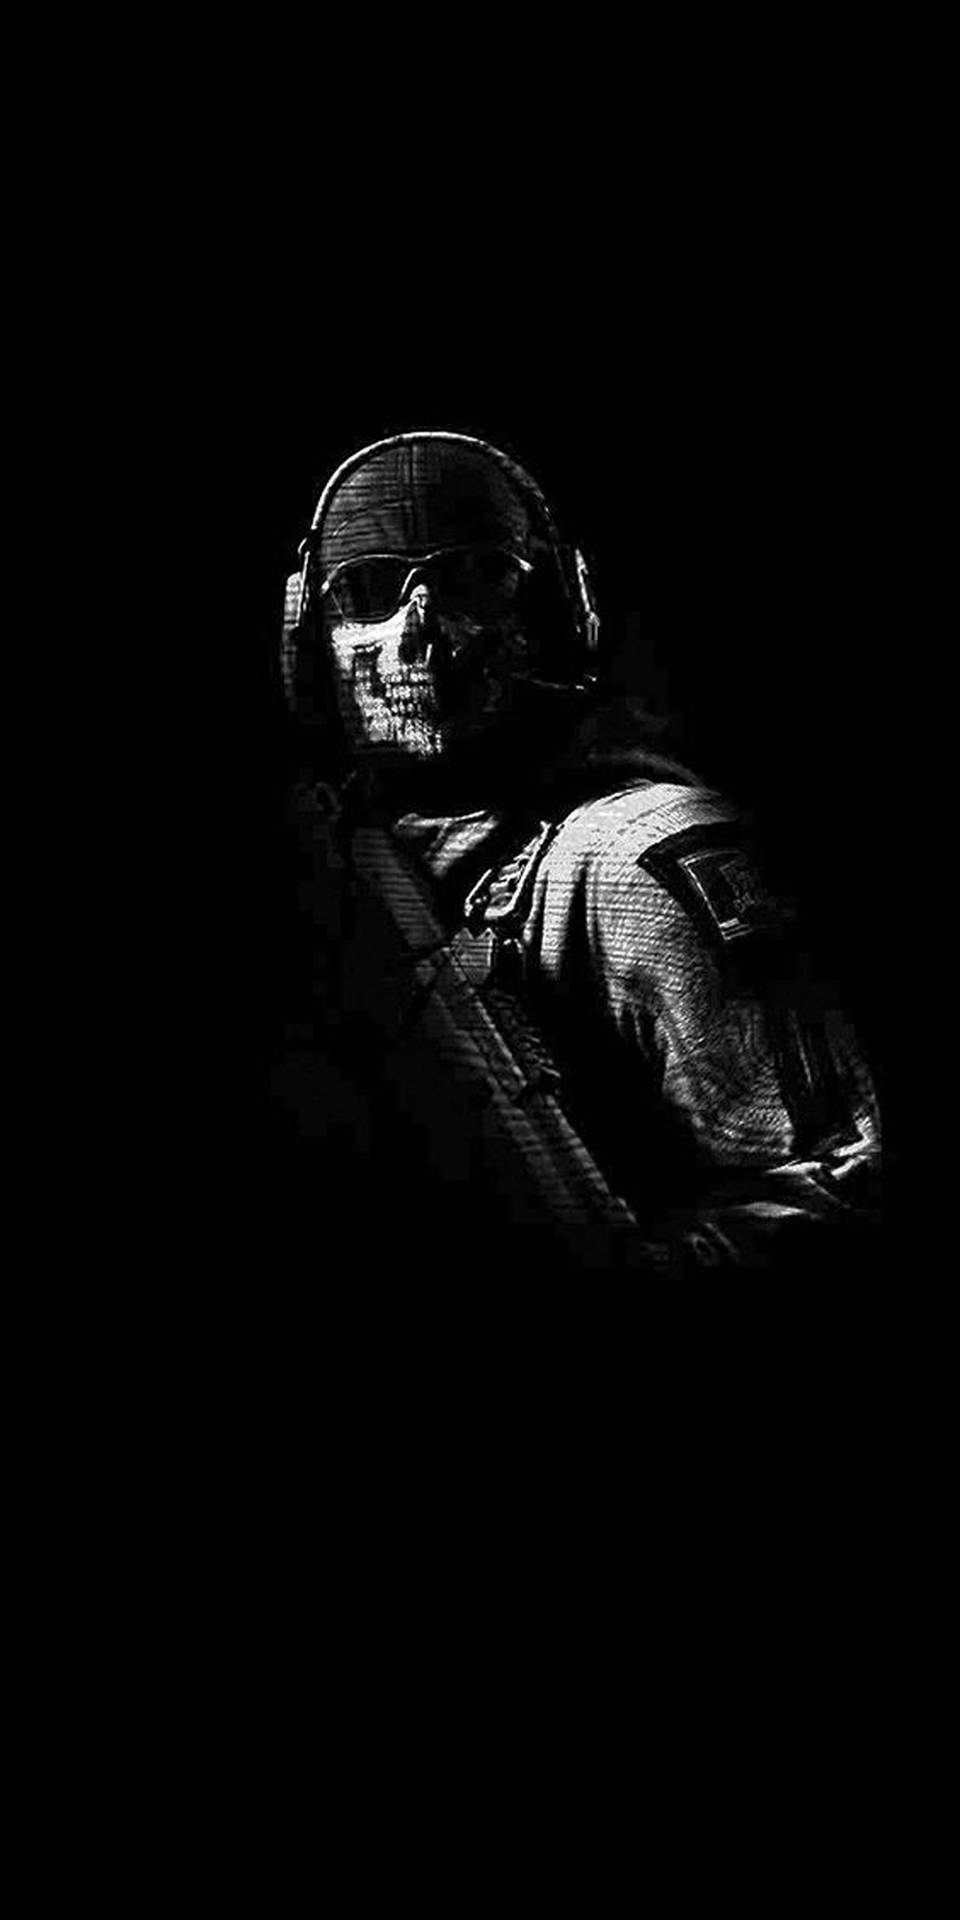 Free Call Of Duty Ghost Wallpaper Downloads, [100+] Call Of Duty Ghost  Wallpapers for FREE 